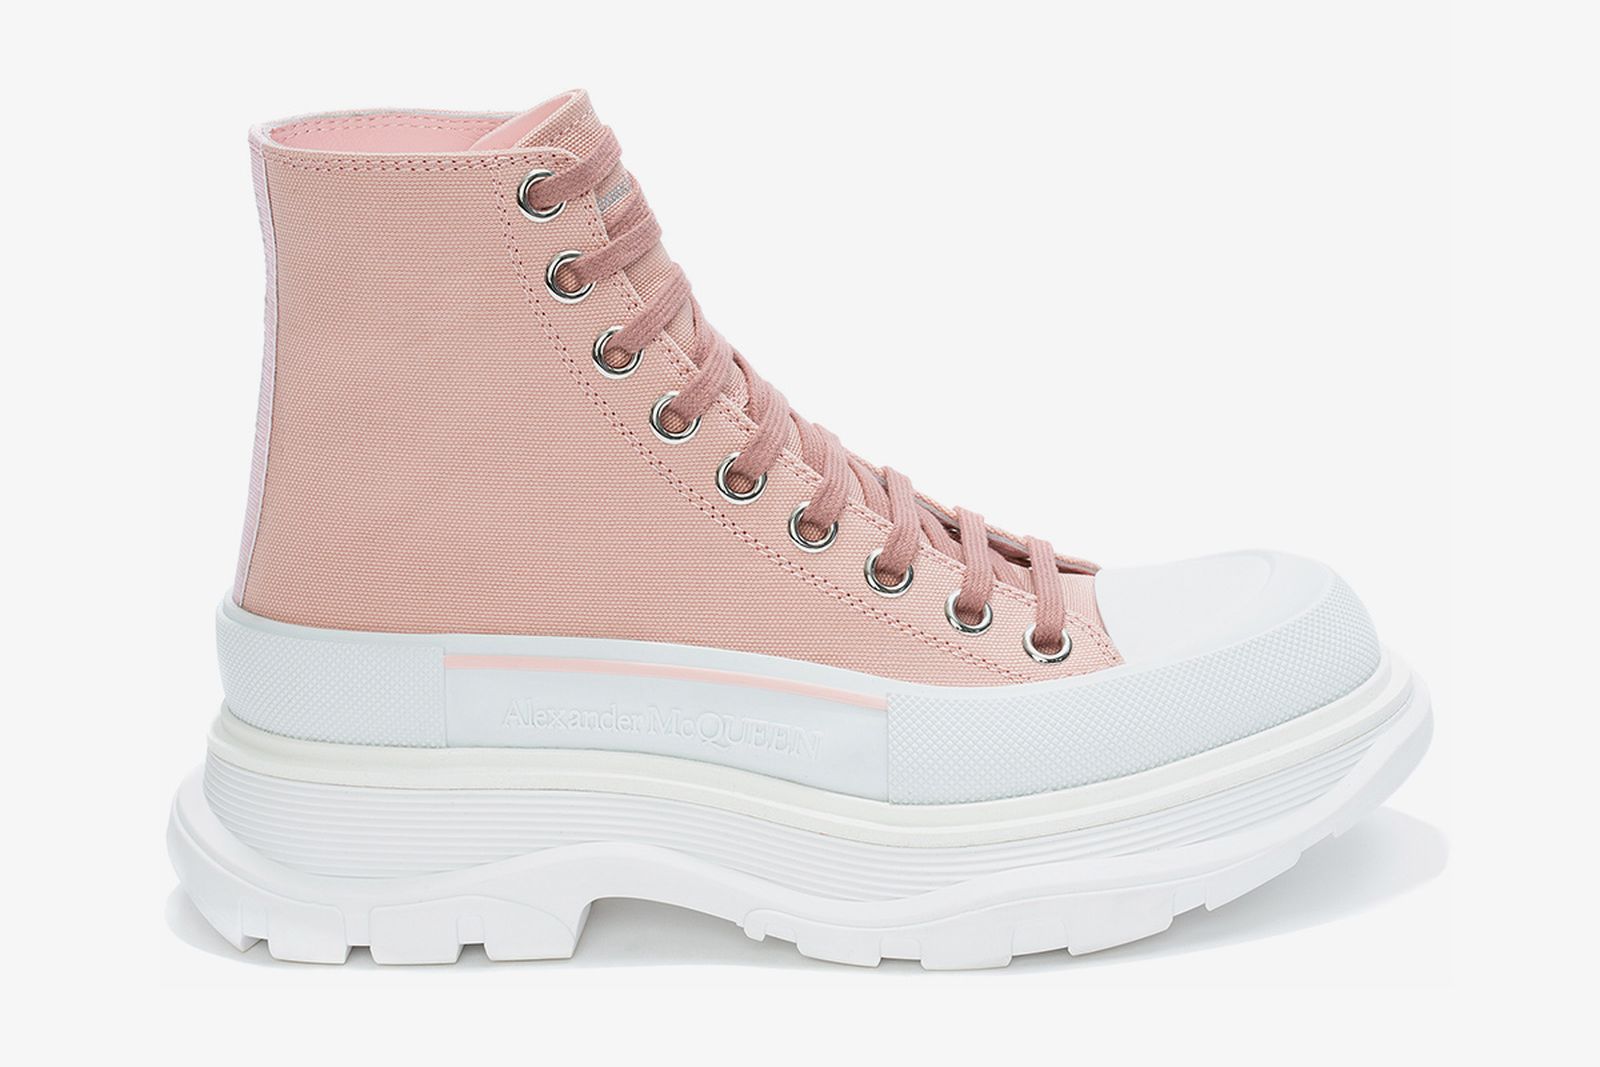 Alexander McQueen Tread Slick: Official Images & Where to Buy